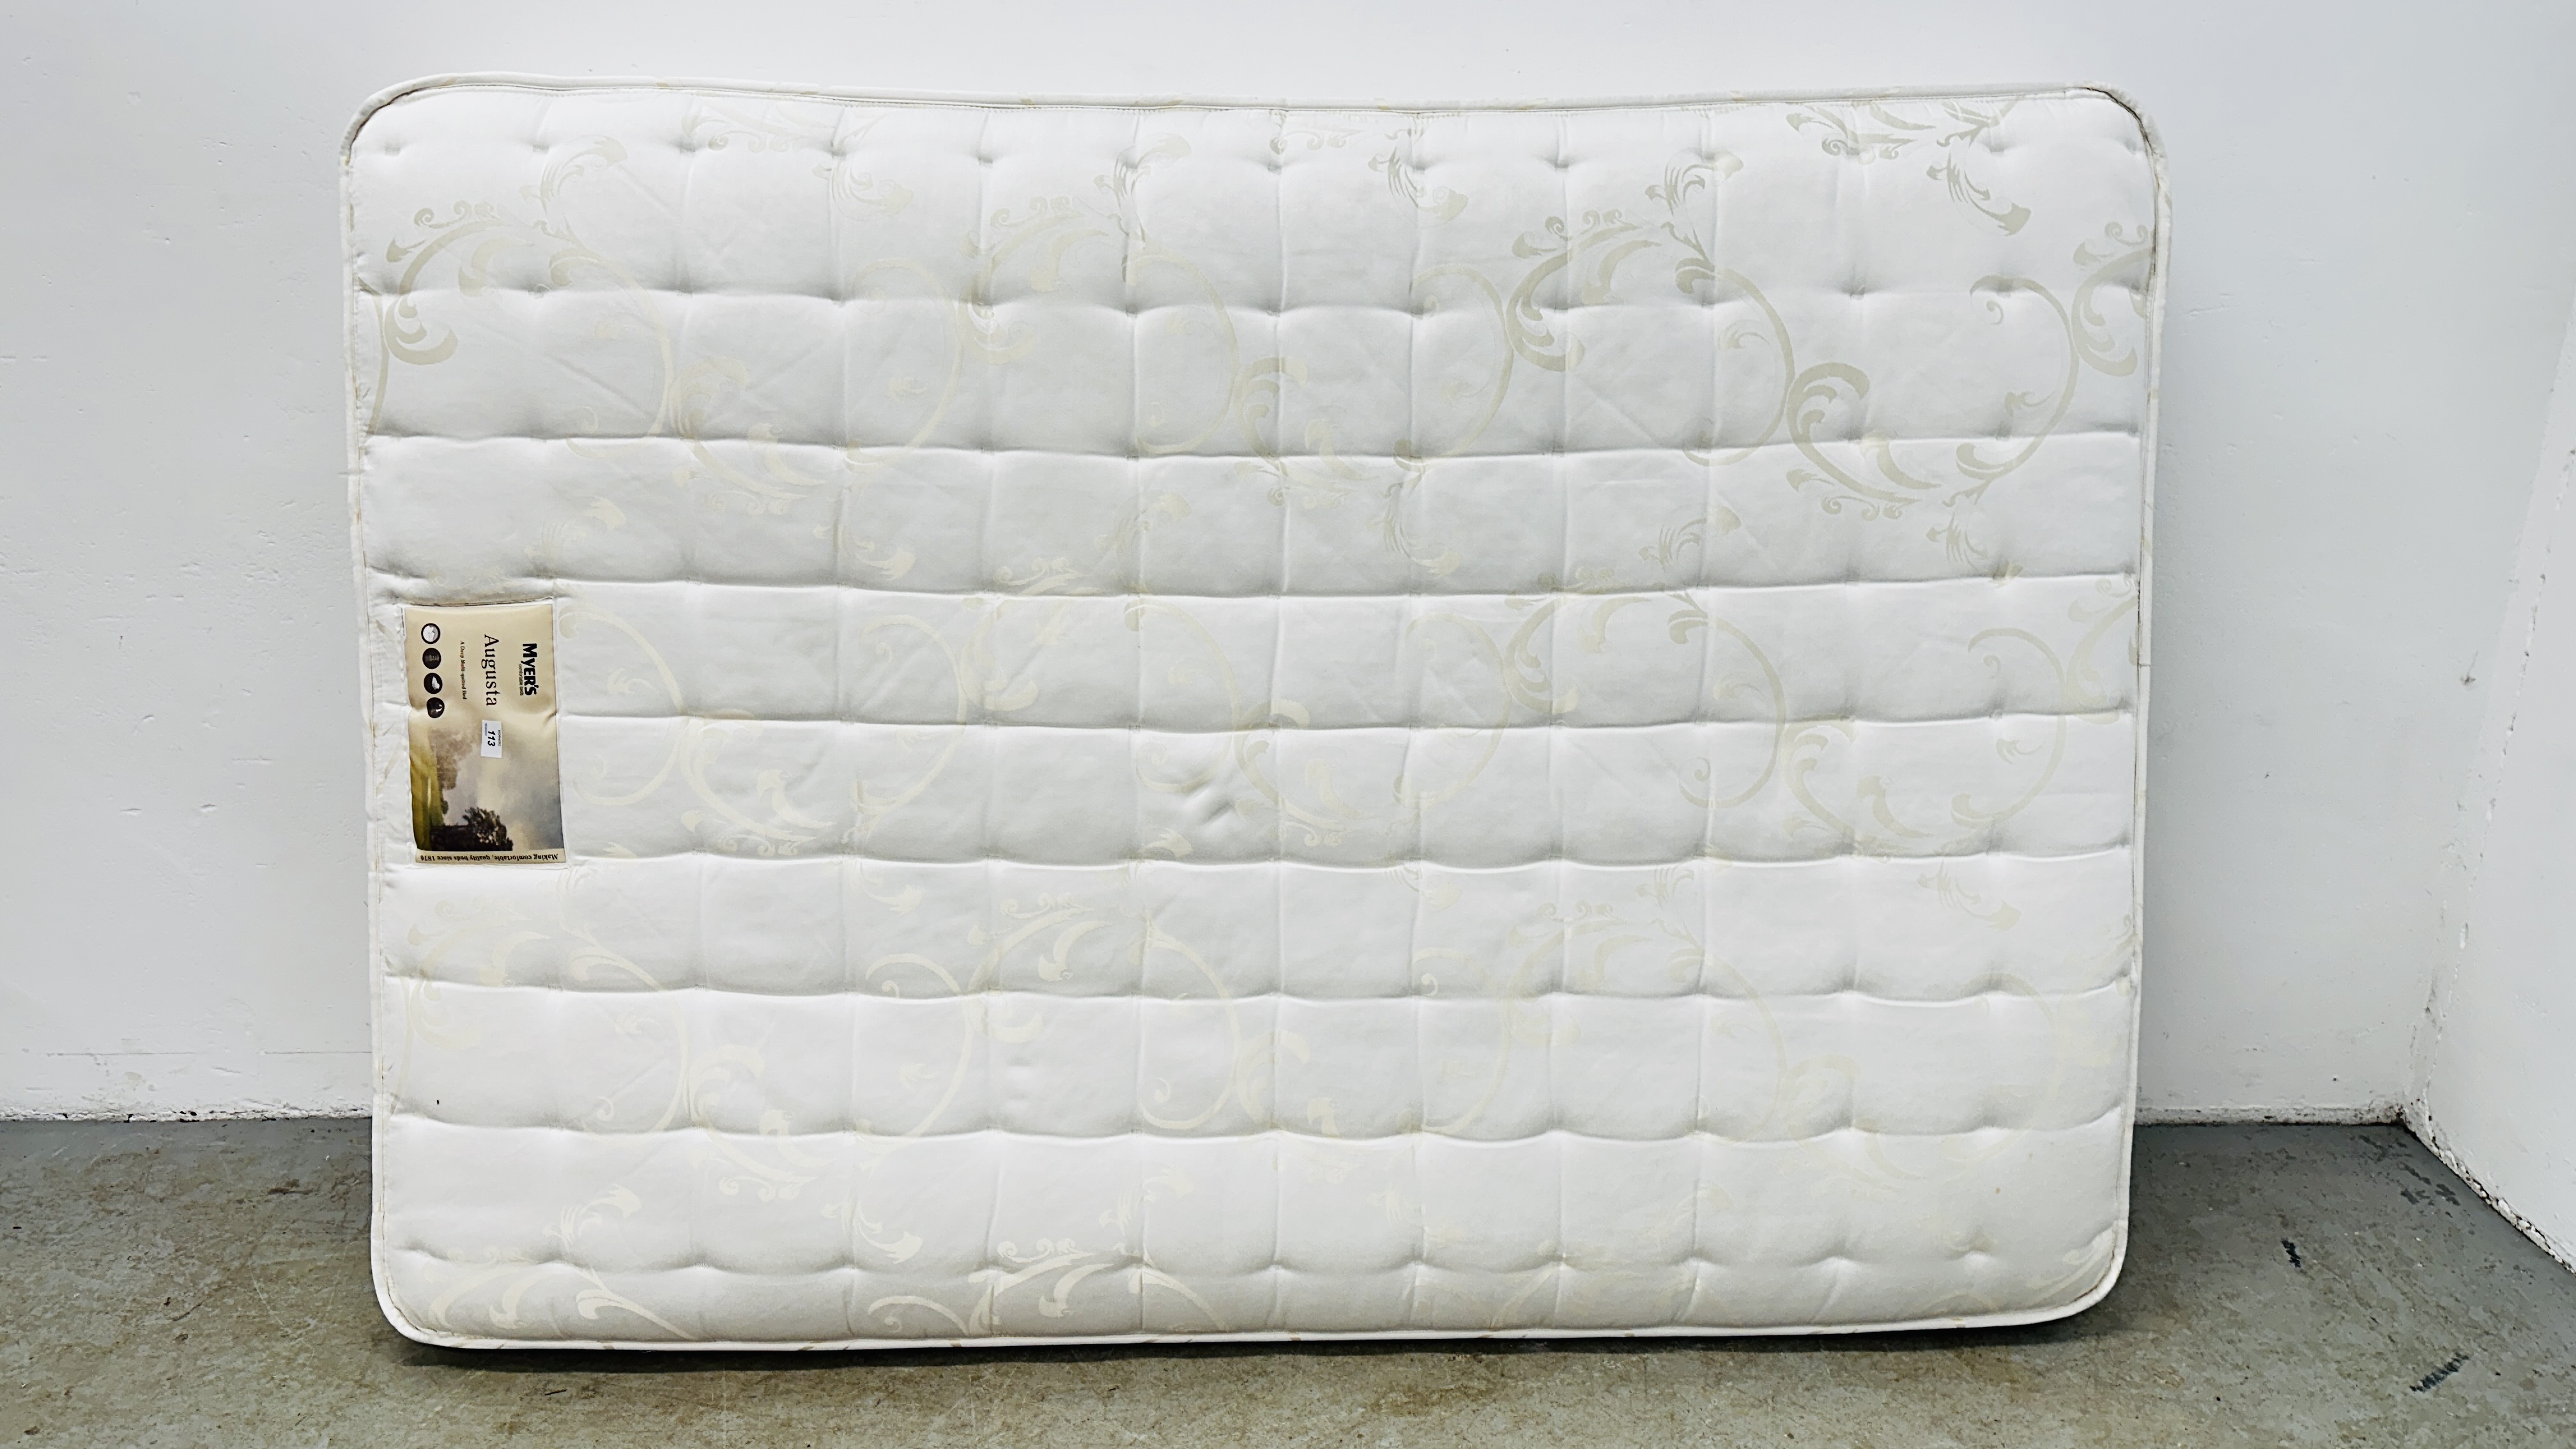 MYERS "AUGUSTA" DEEP QUILTED DOUBLE MATTRESS.